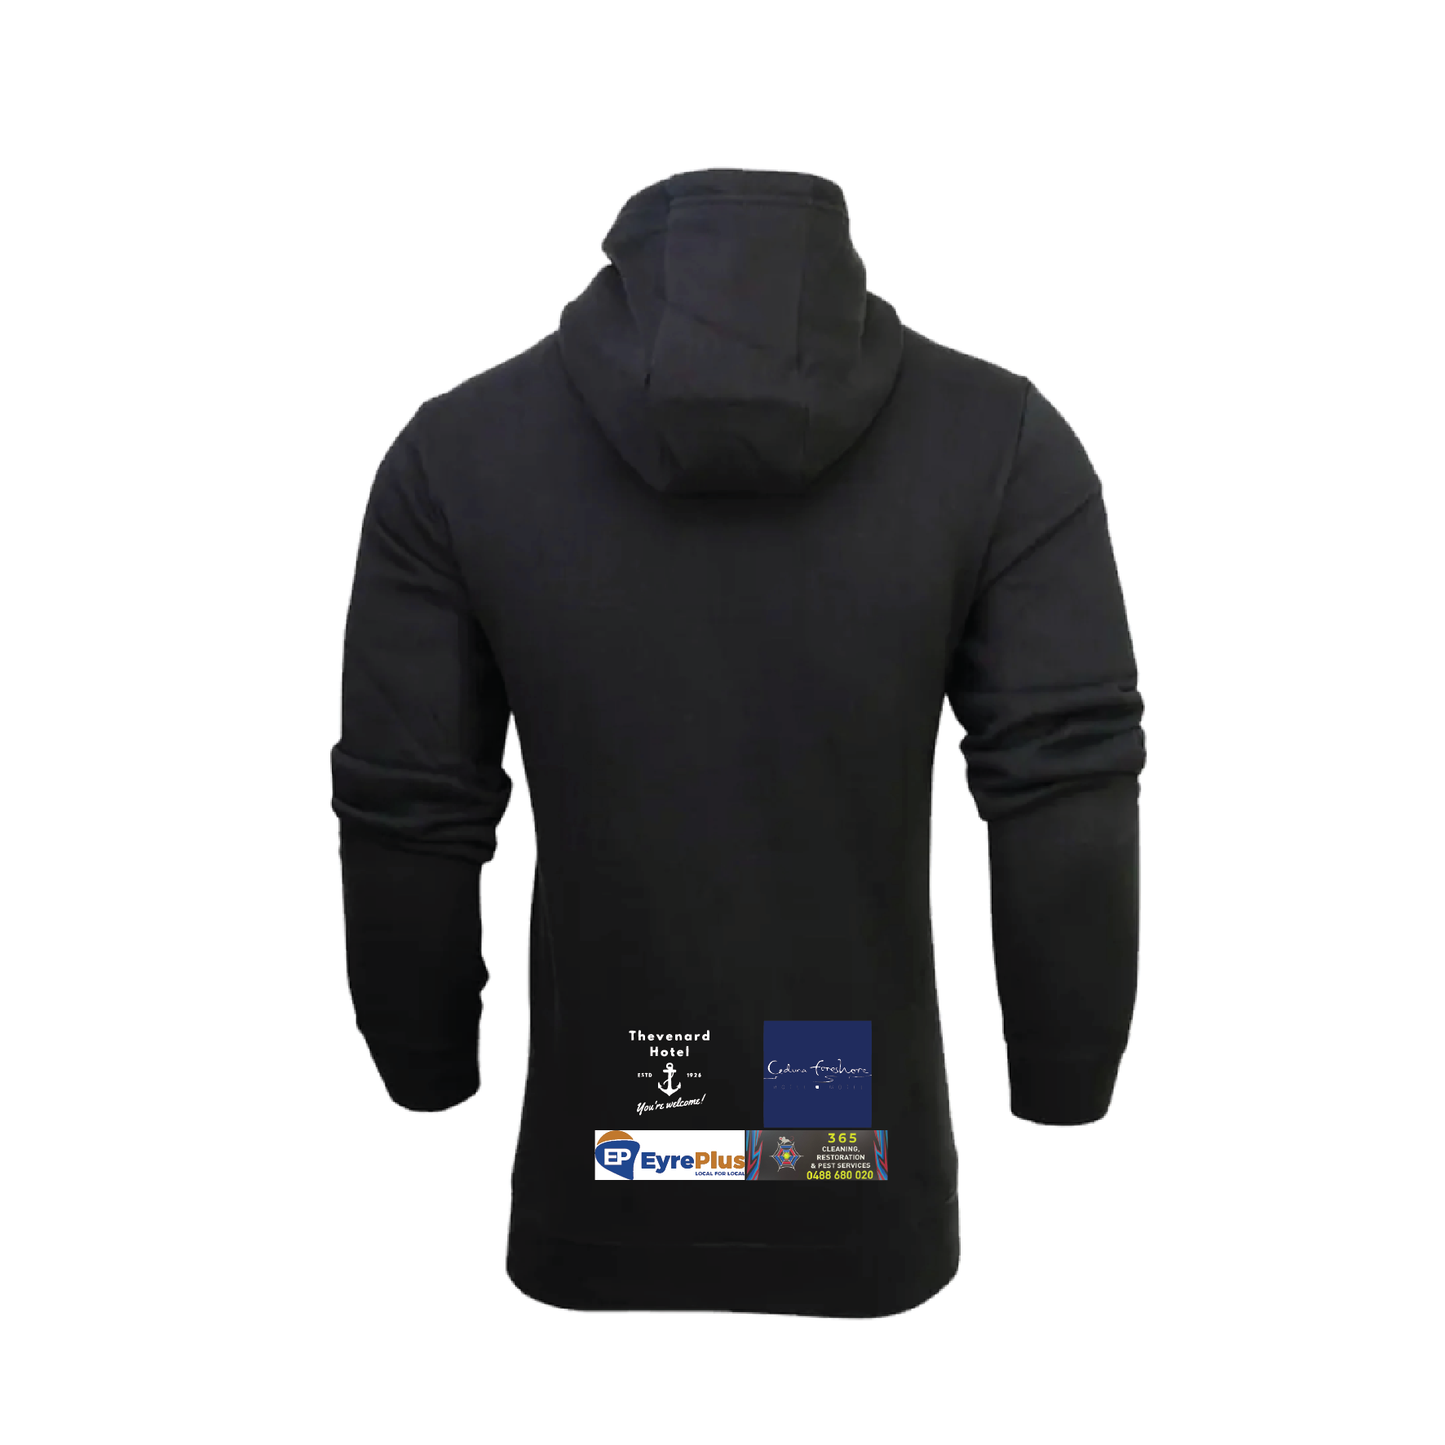 THEVENARD SPORTS CLUB HOODED SWEAT - THEVY FRONT LOGO